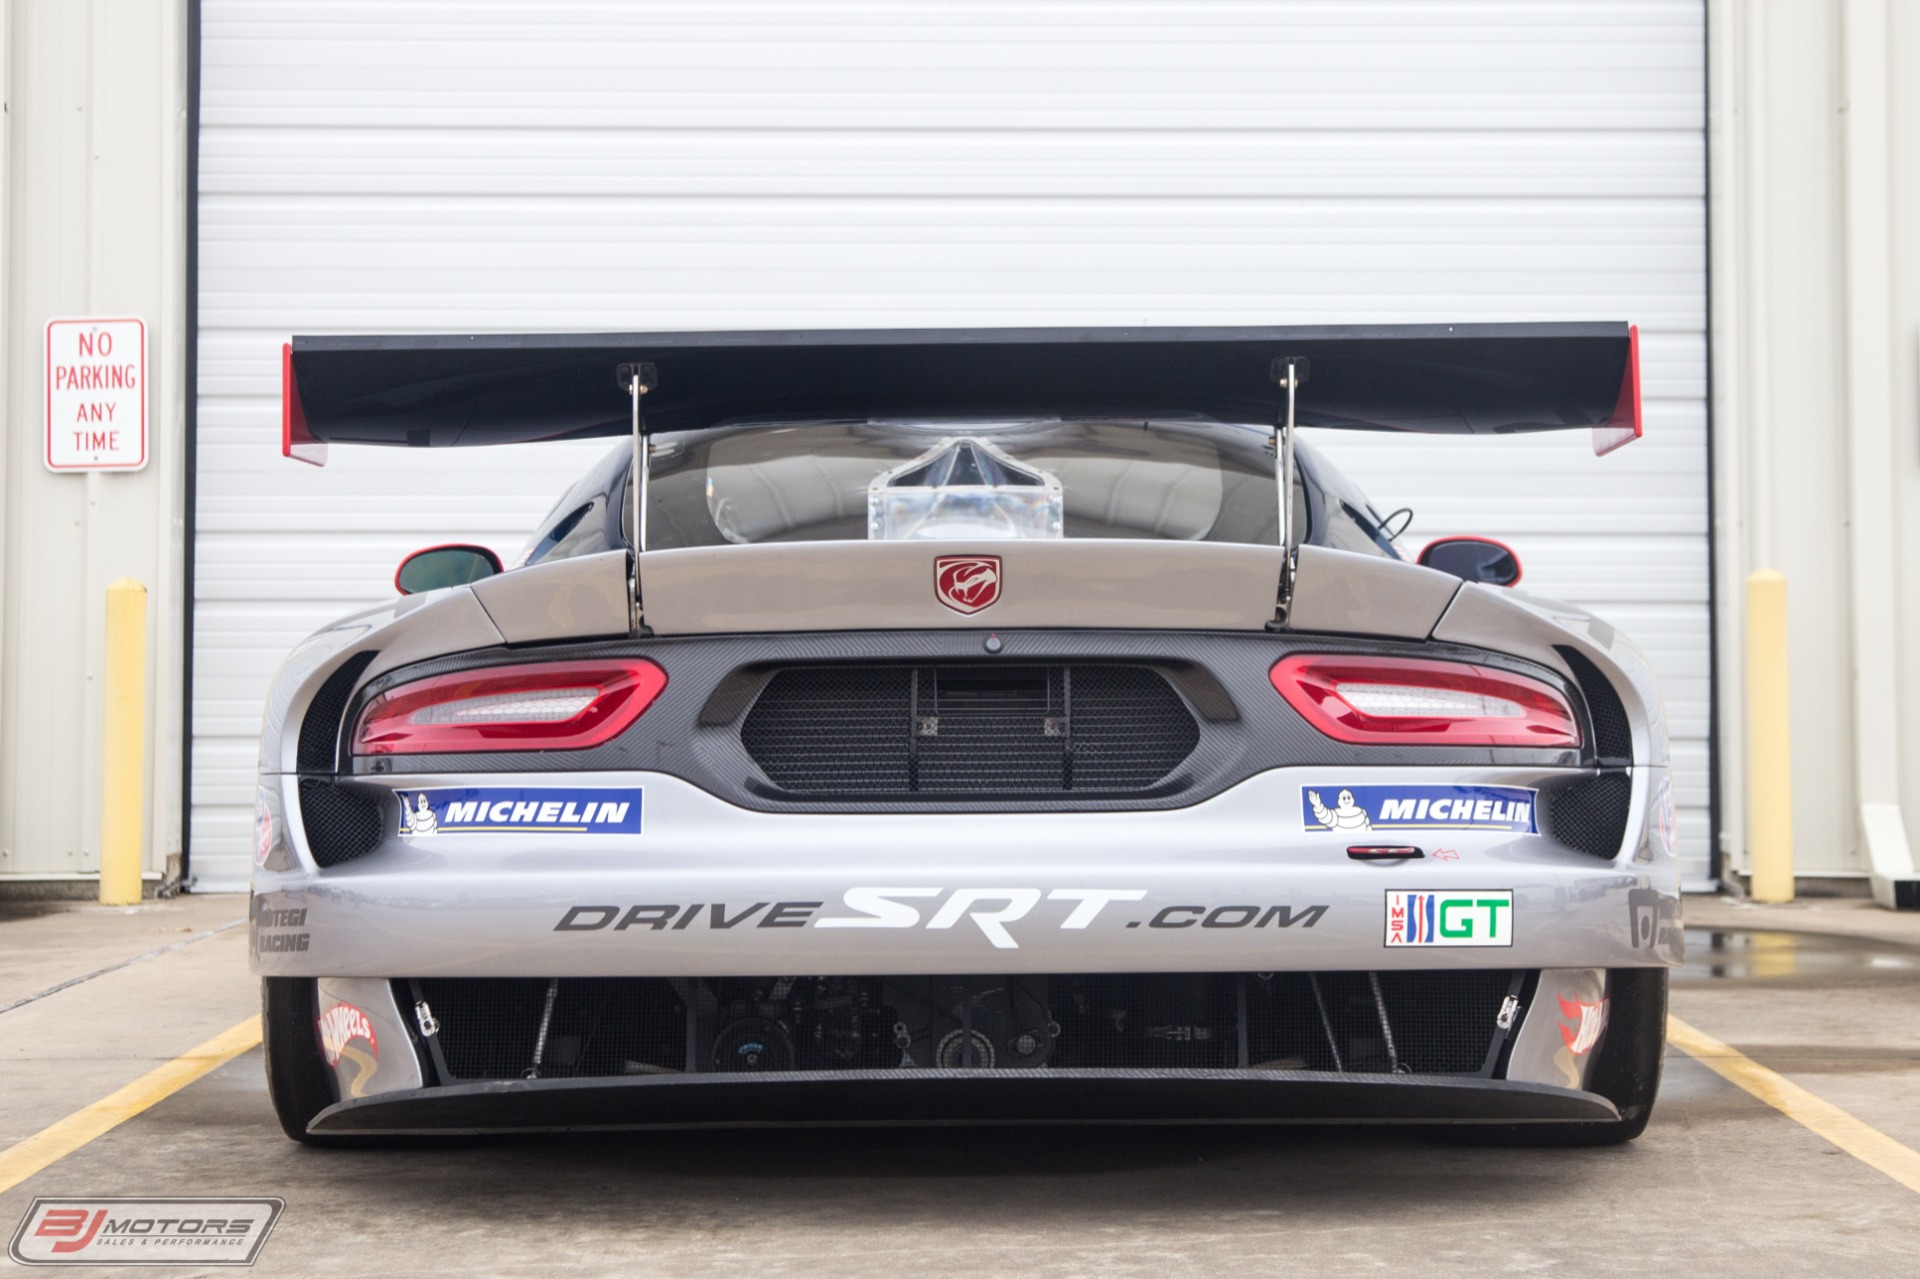 Used-2012-Dodge-Viper-GTS-R-Chassis-C01